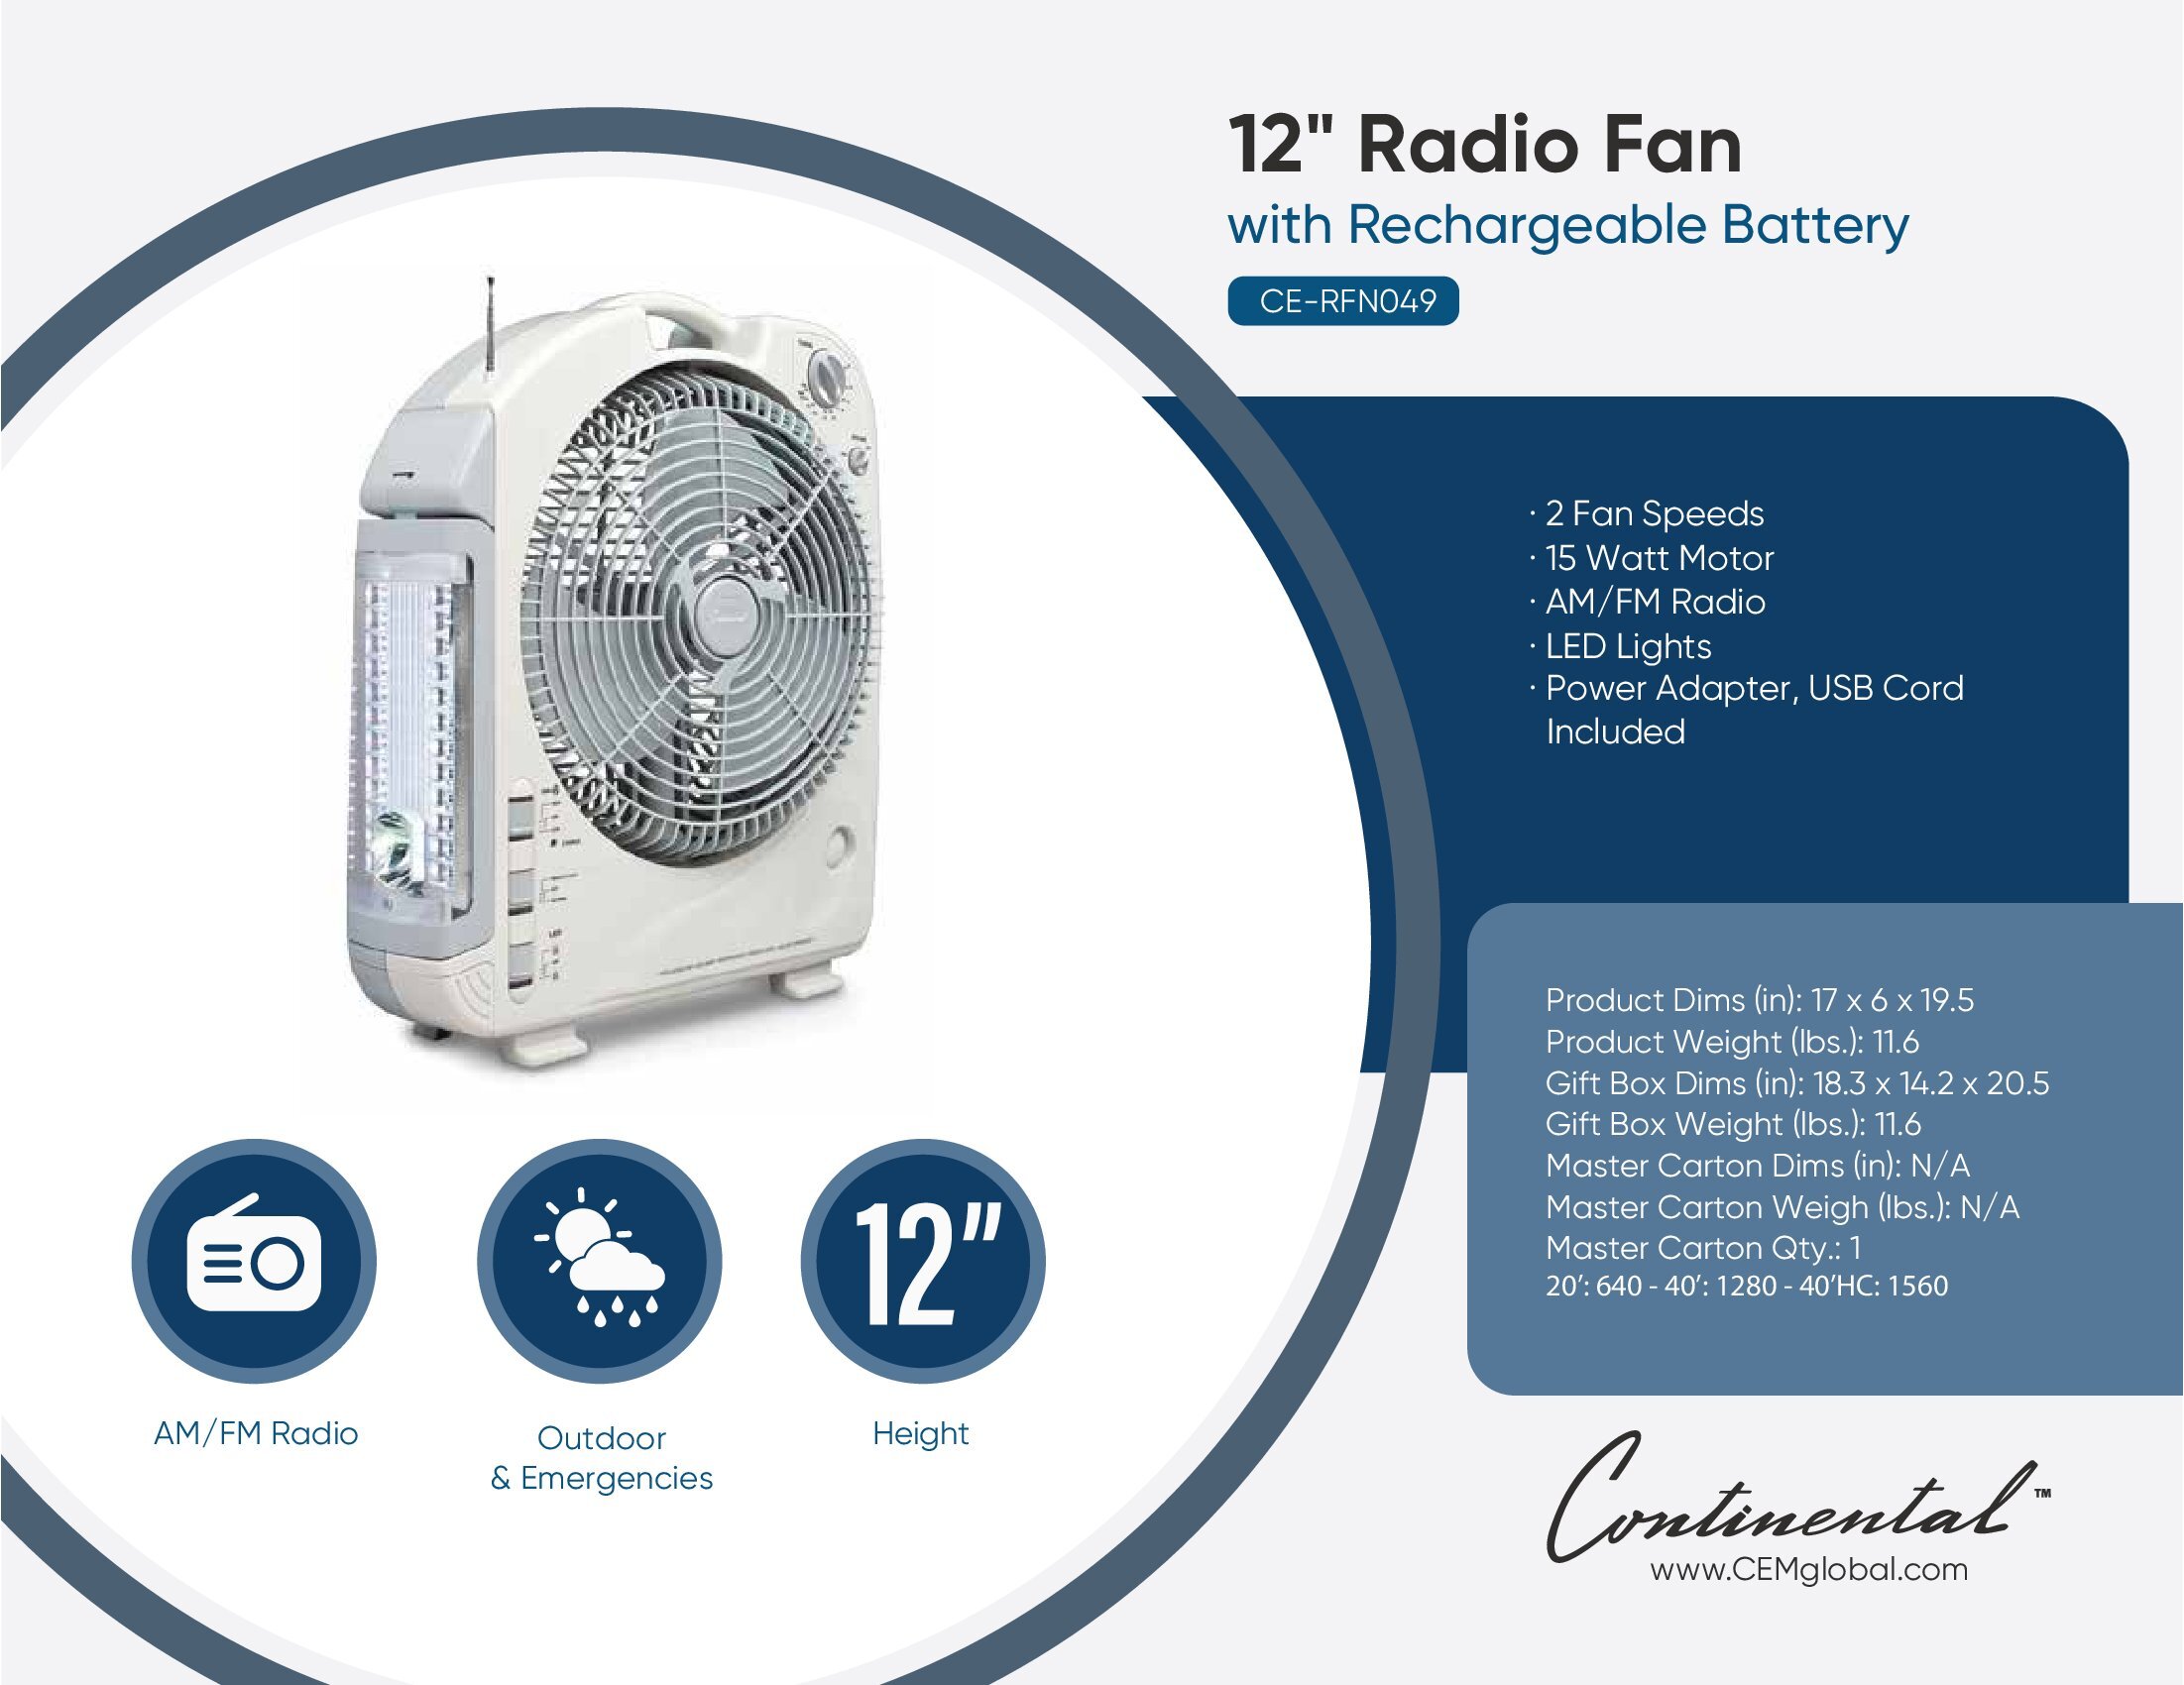 12" Radio Fan with Rechargeable Battery